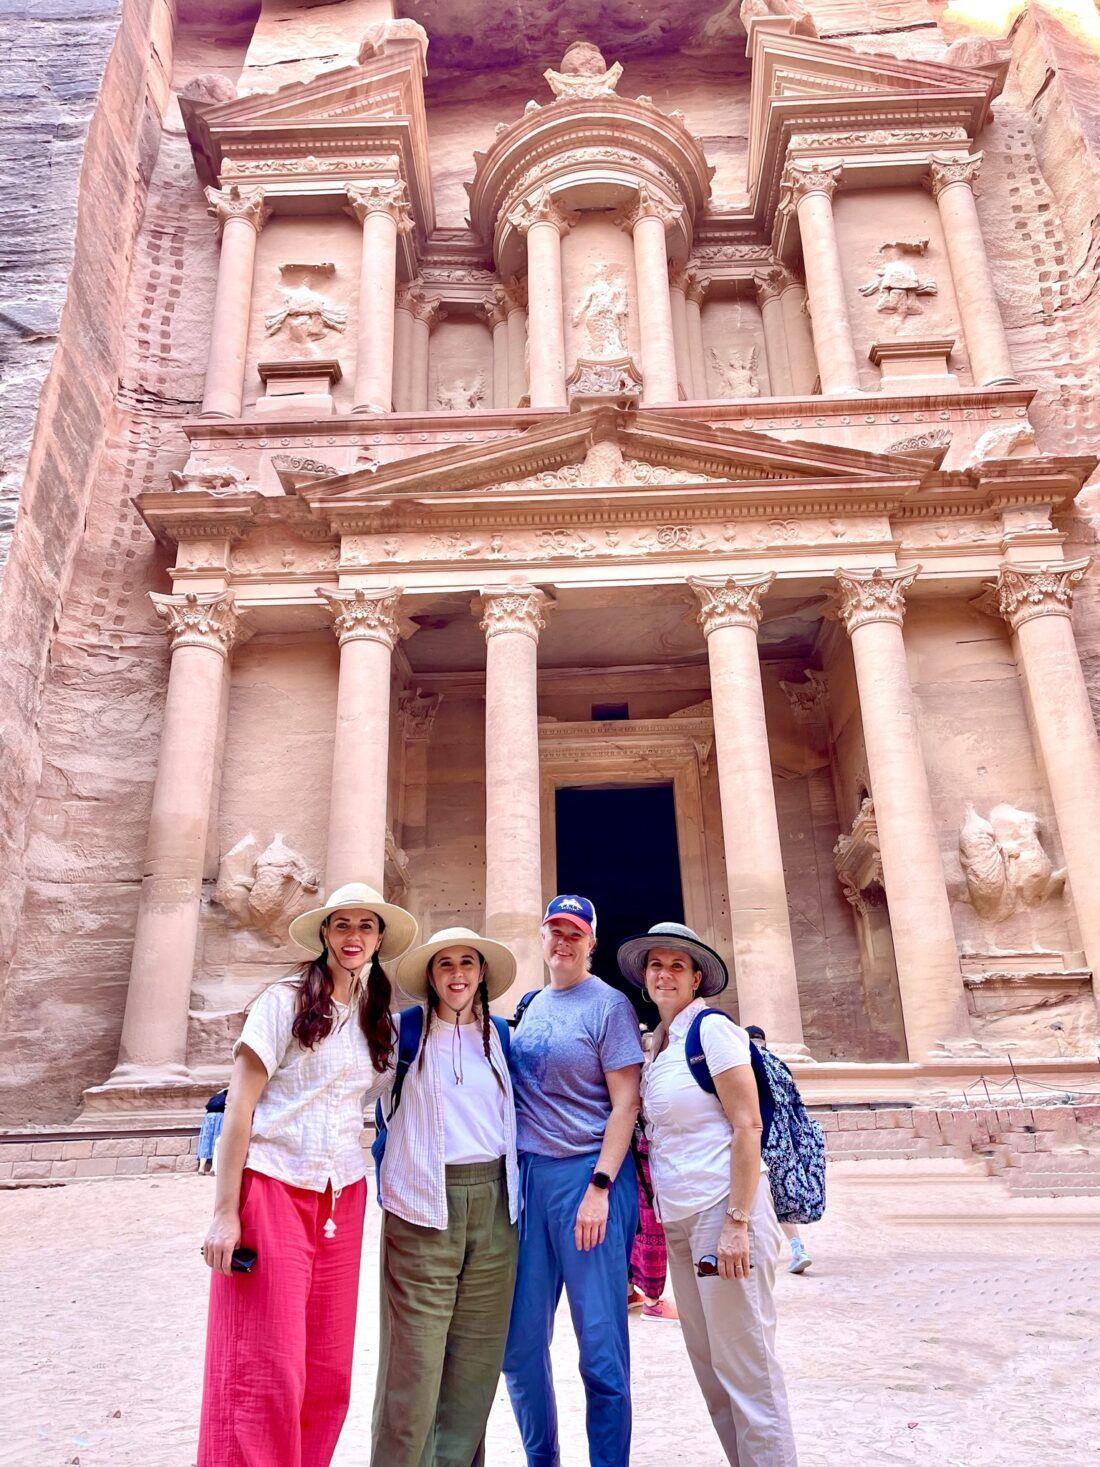 Holy See and enter Petra